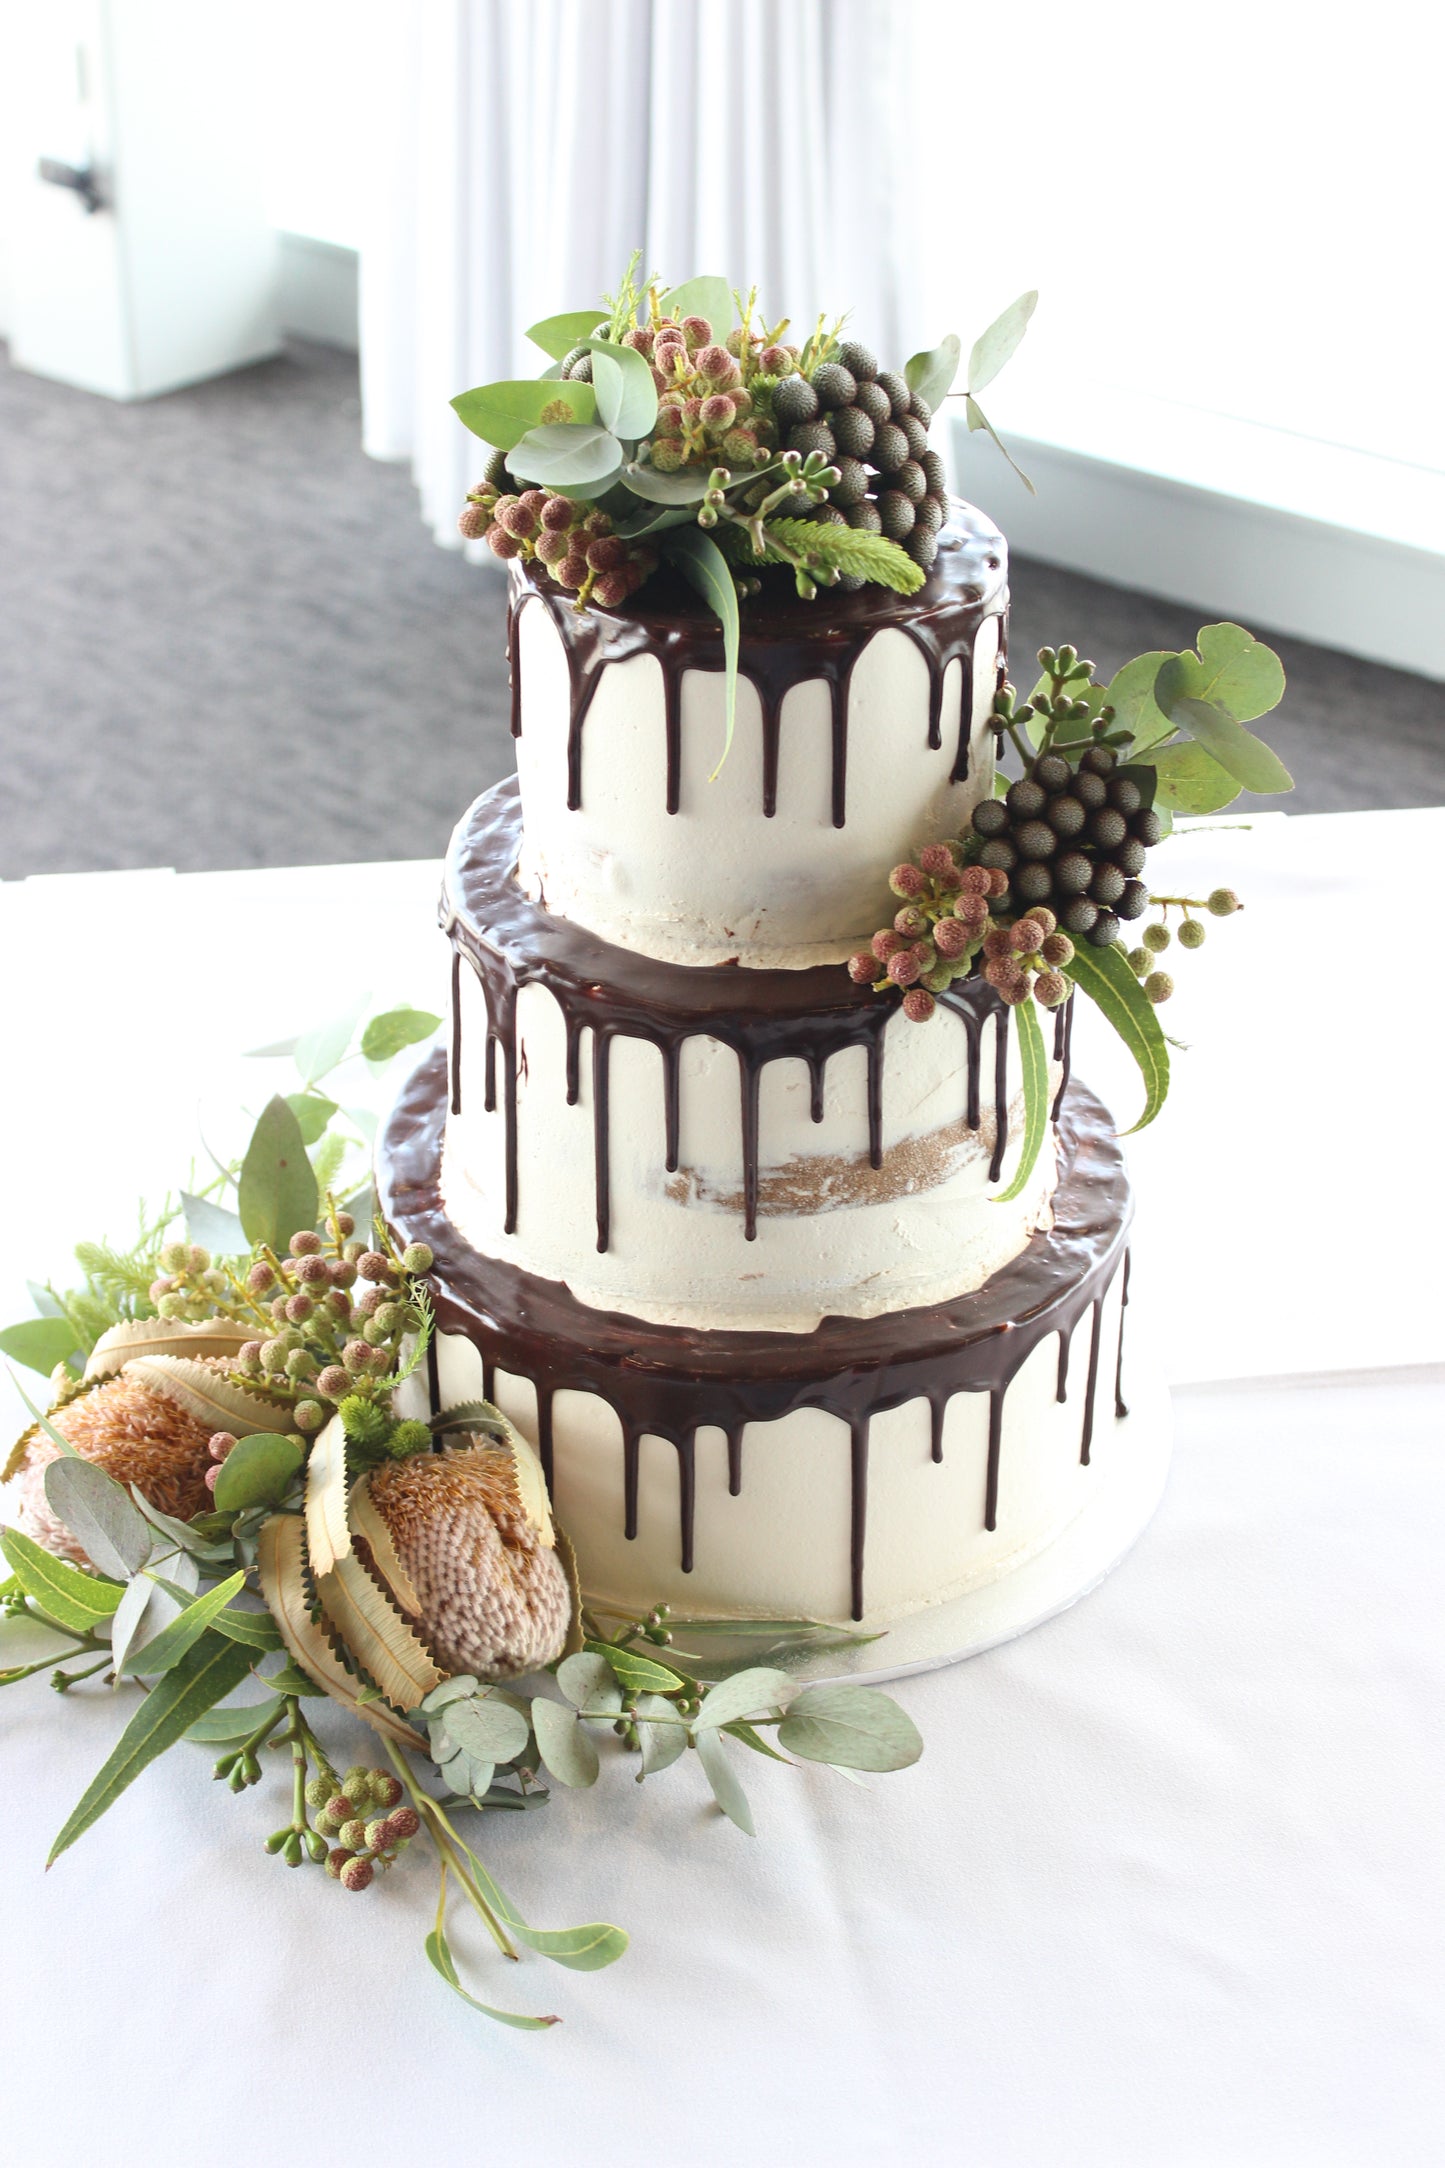 3 Tier Semi Naked, Chocolate Drizzle & Native Flowers